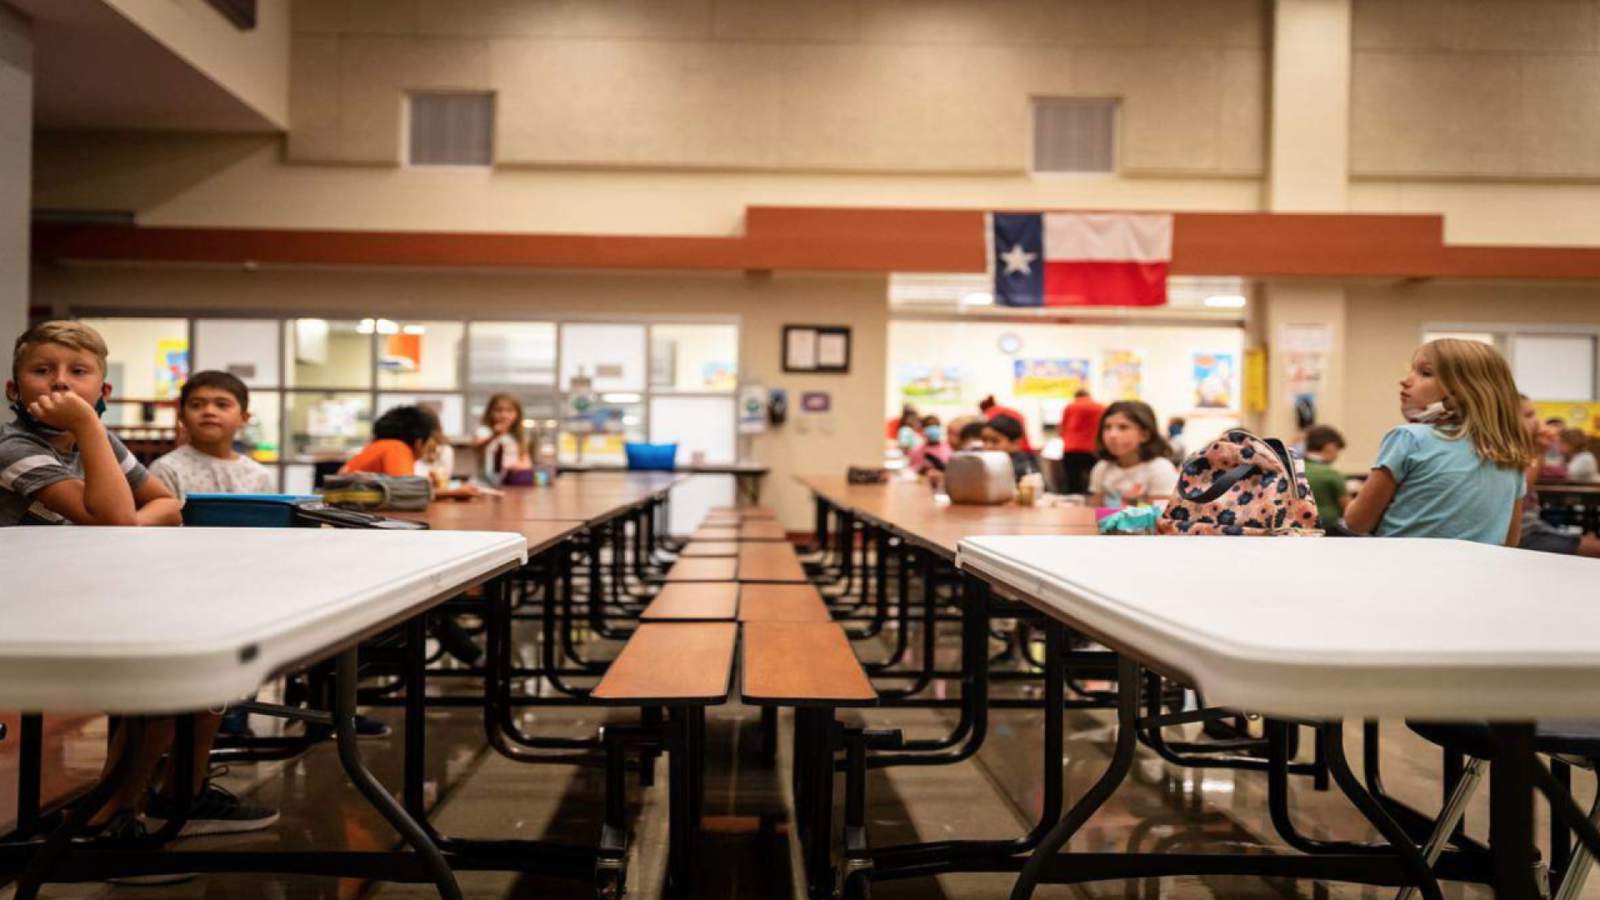 Texas teachers union says hundreds of members report violations of COVID-19 safety standards at schools